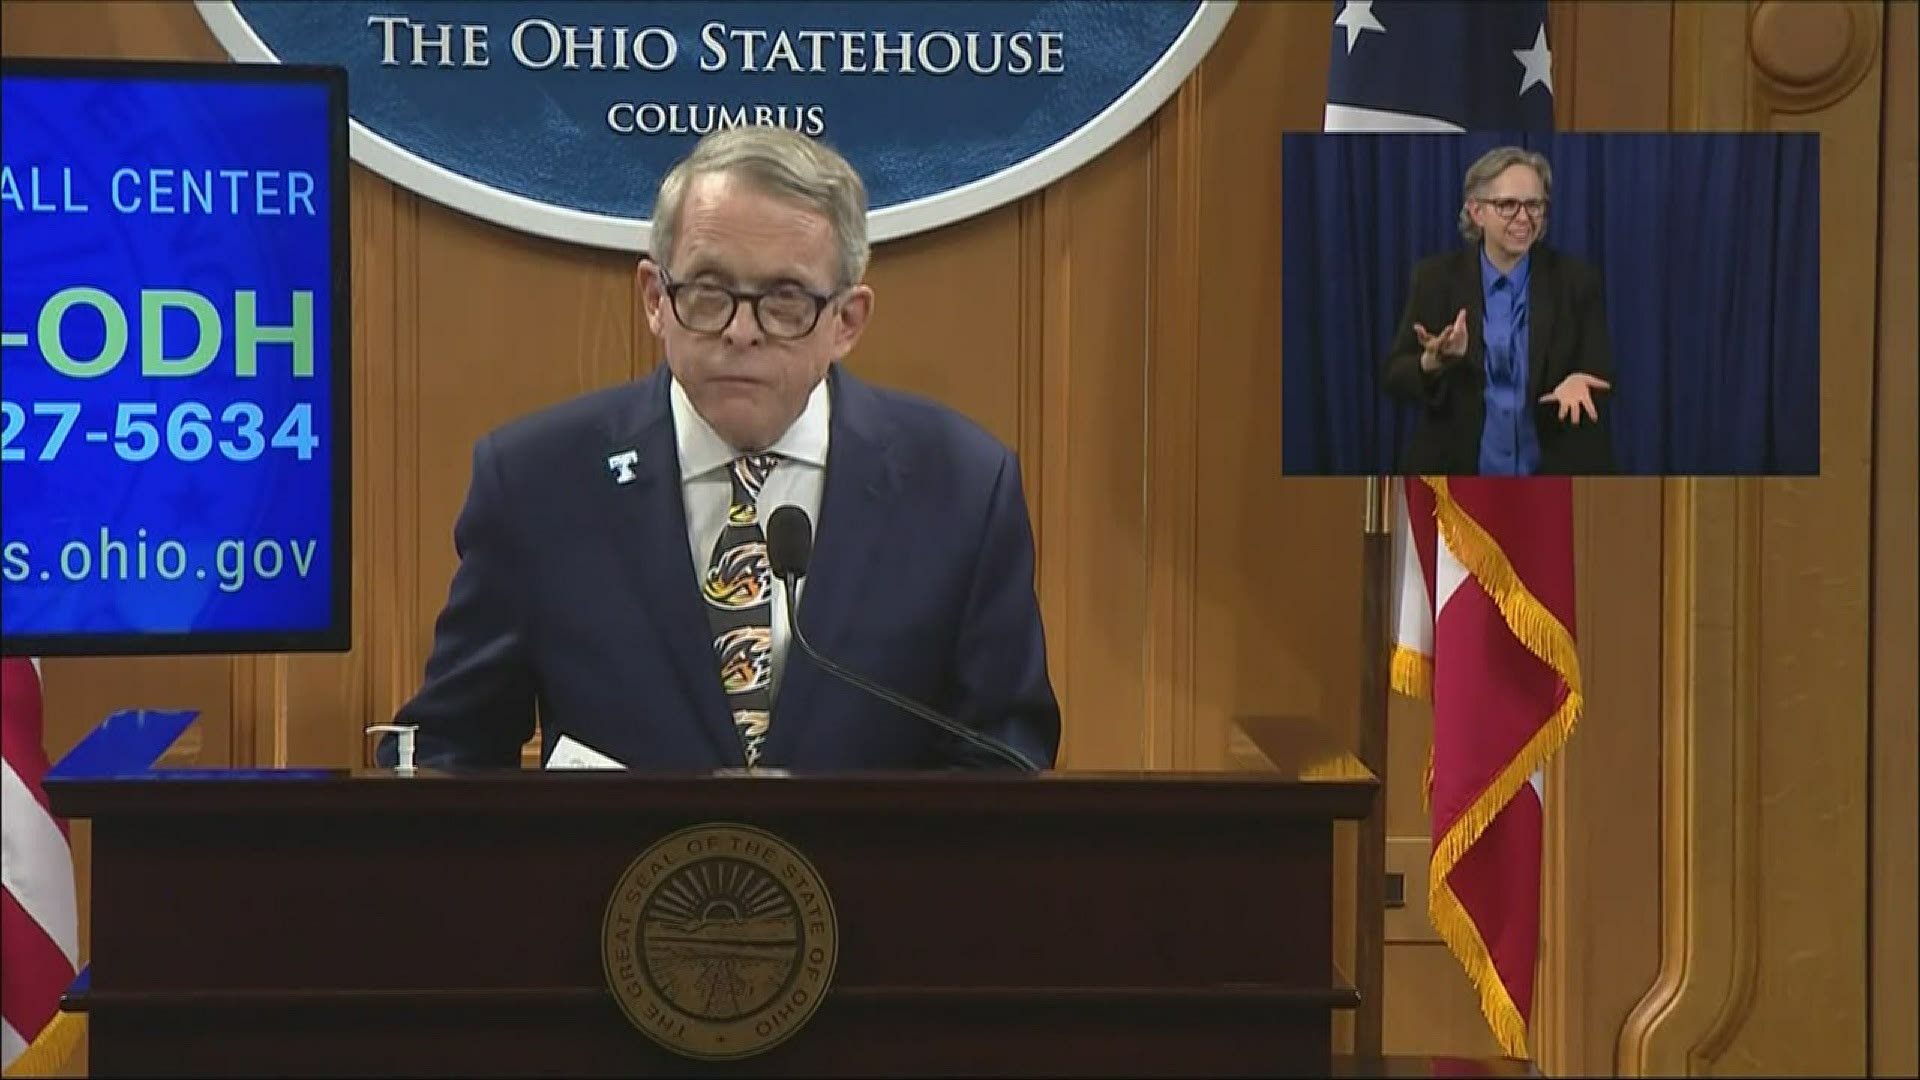 DeWine said Noe will be supervised and must begin making restitution.